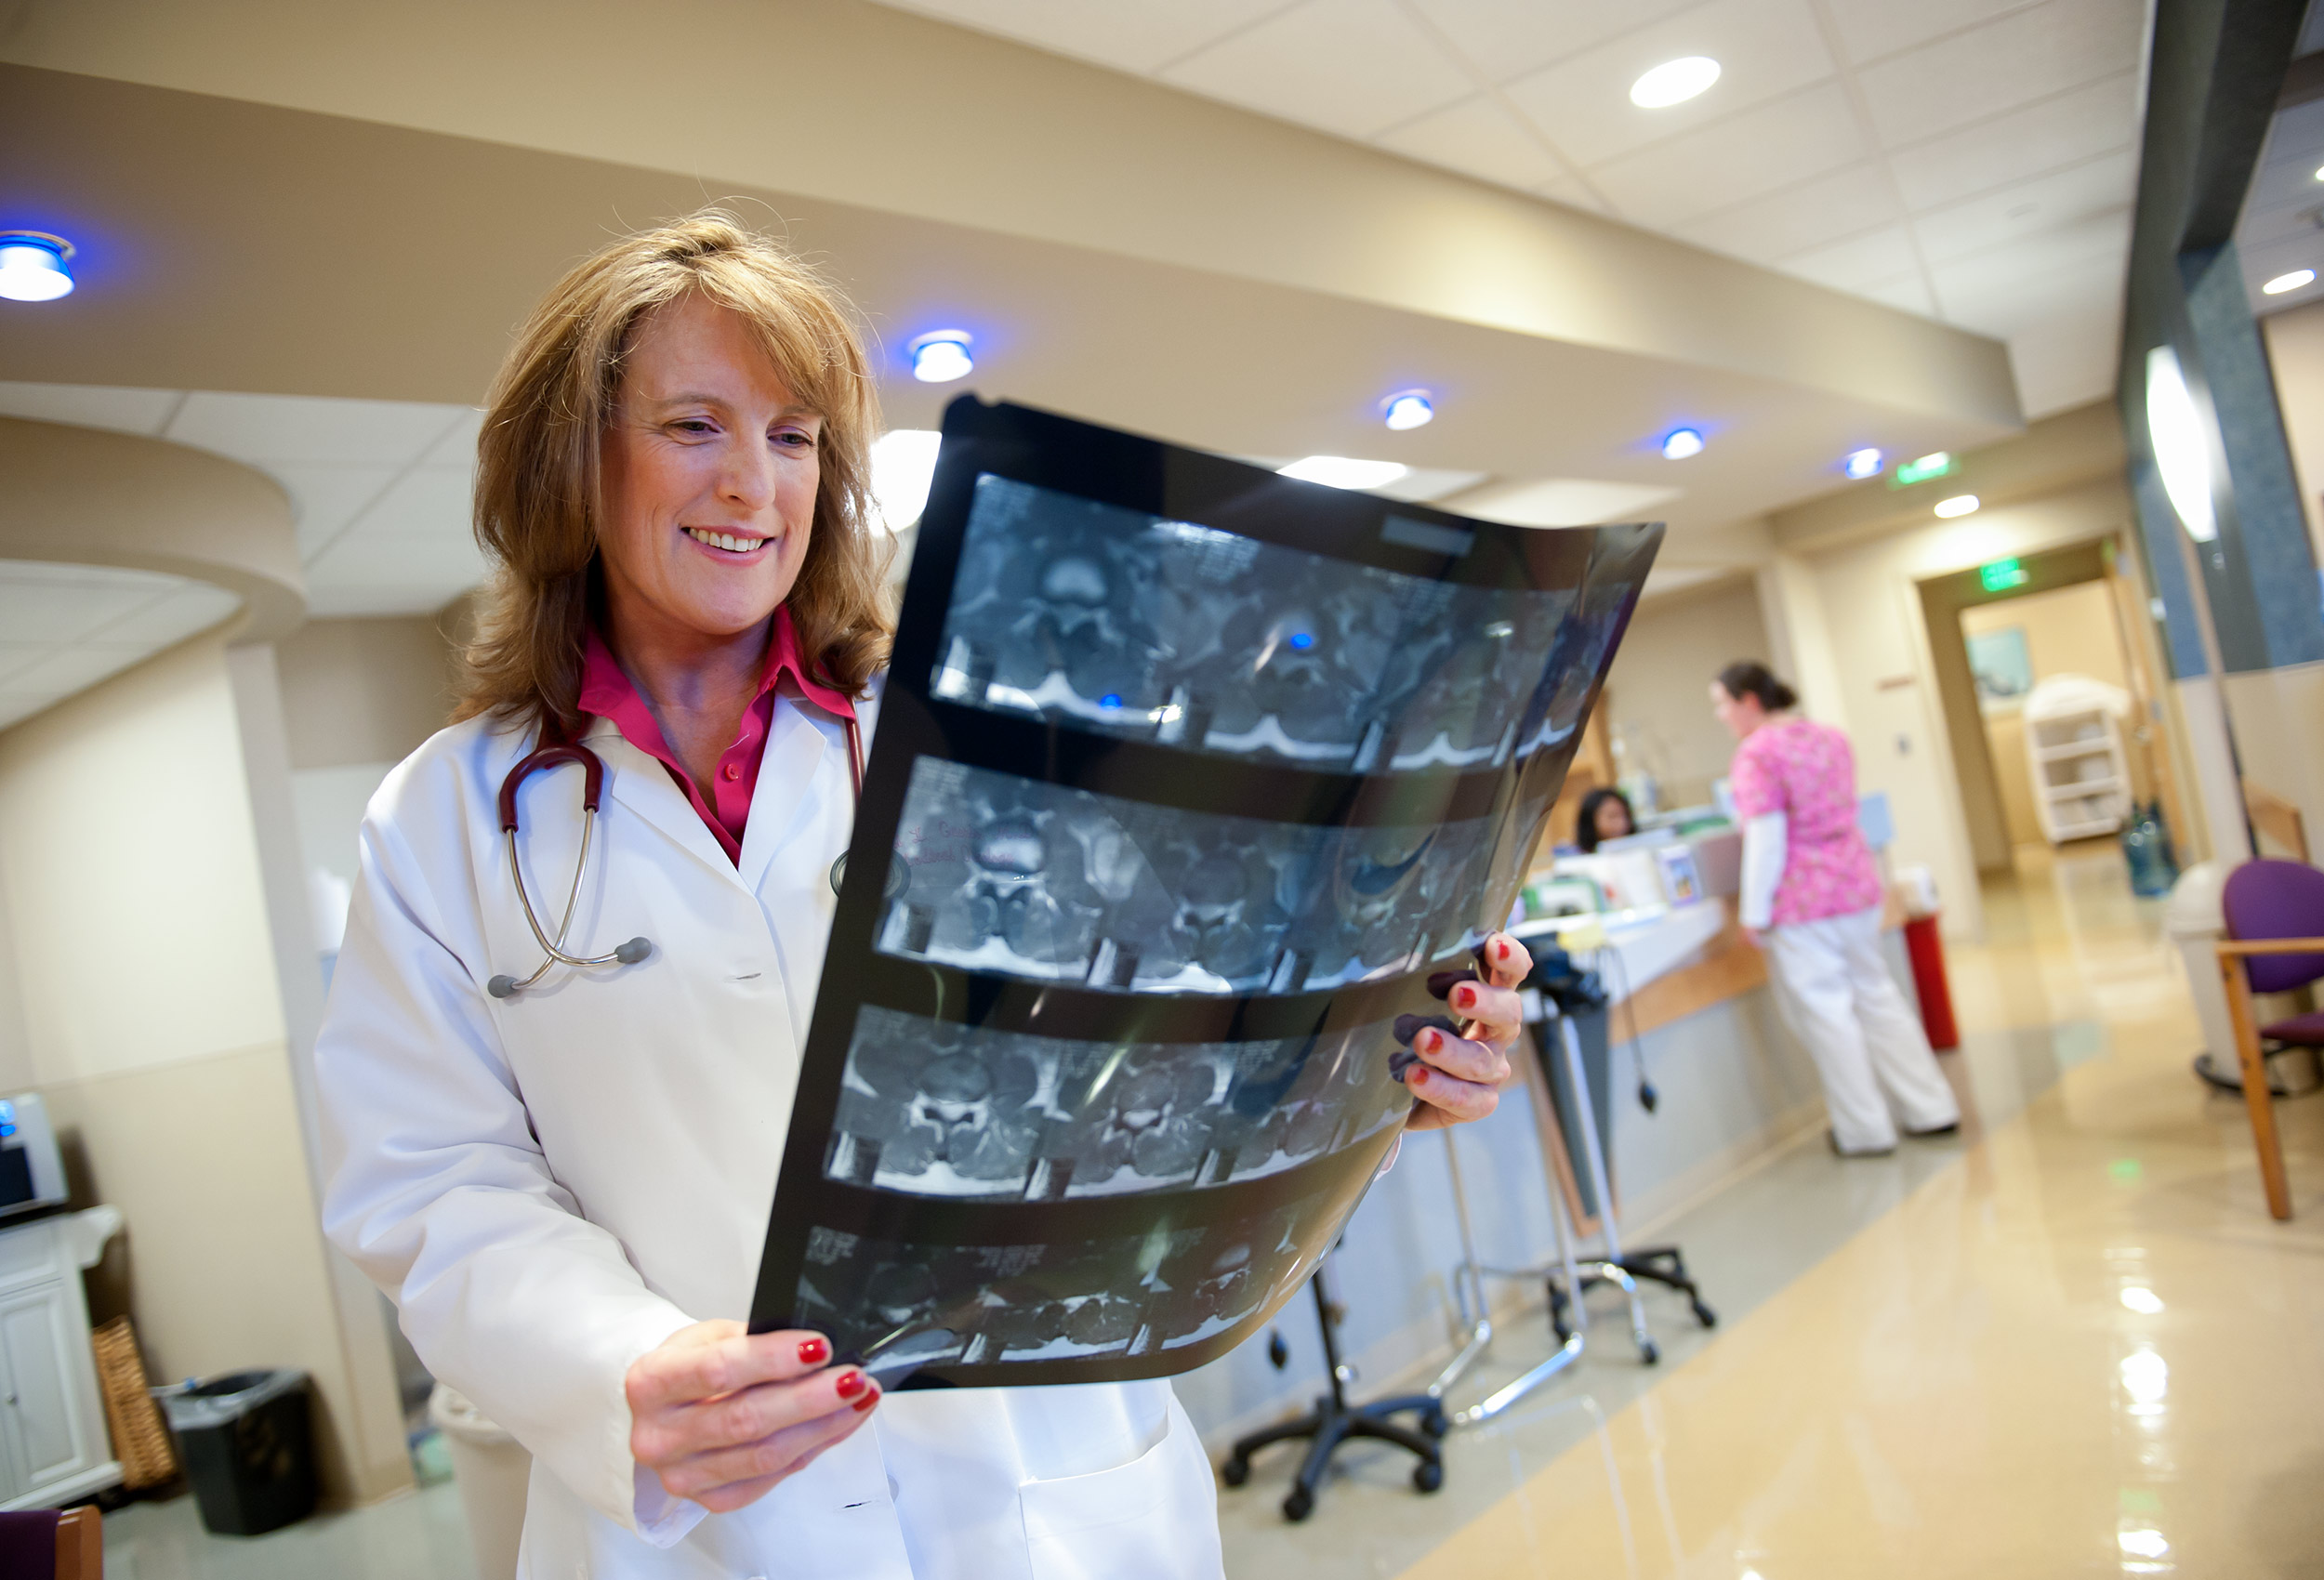 Dr. Bonnie Guerrin looks at x-rays at nurses station in hospital